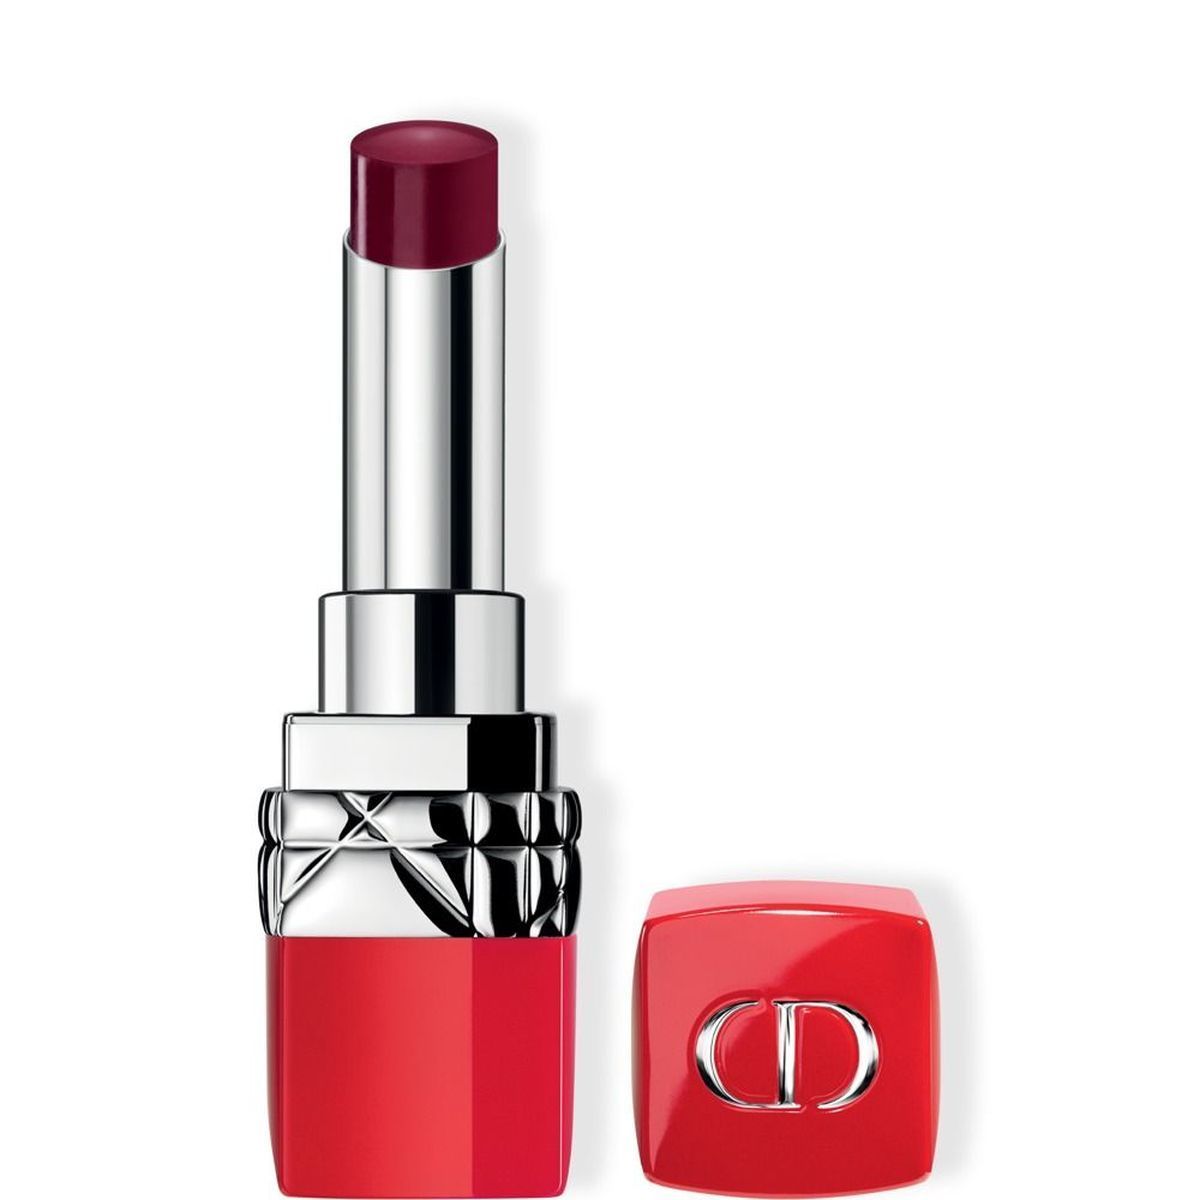 Dior Ultra Rouge Long Lasting Lipstick Tester